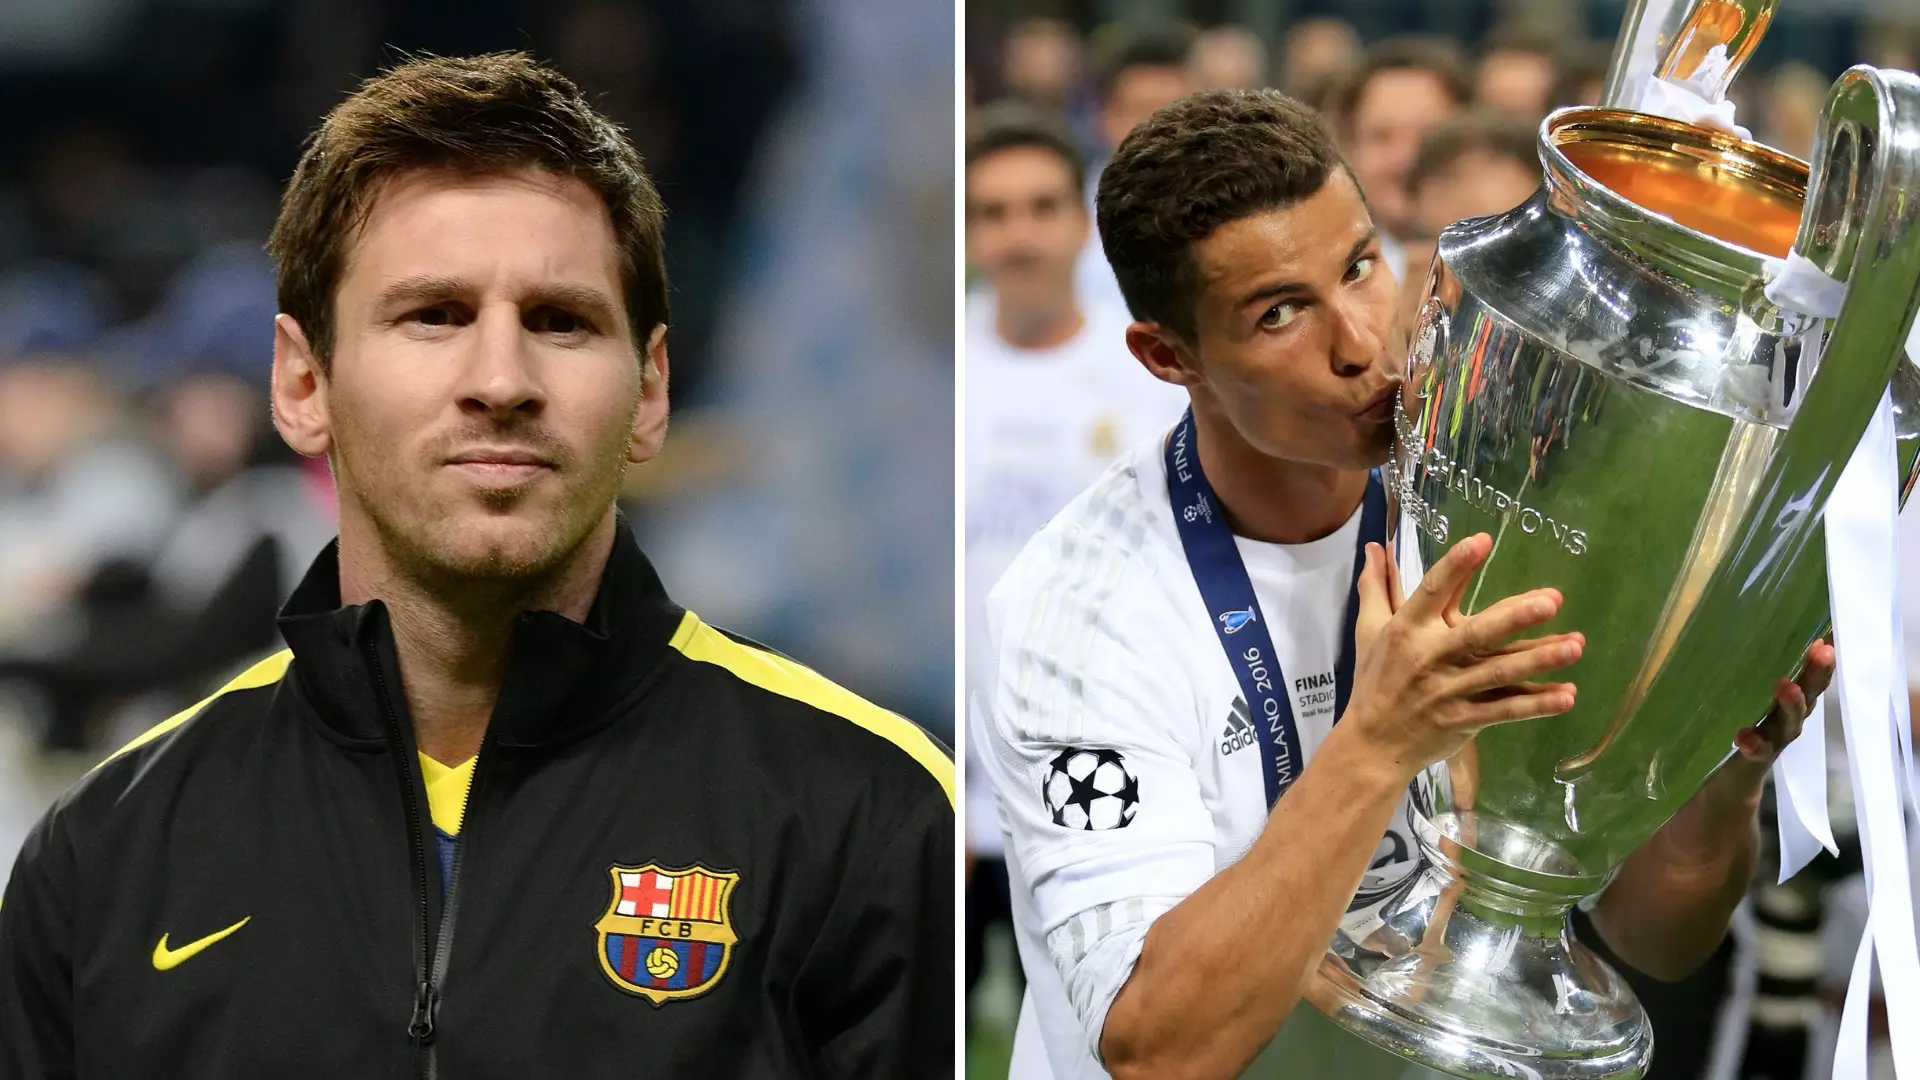 Cristiano Ronaldo Blasts Lionel Messi By Saying He ‘Won The Champions League With Different Clubs’